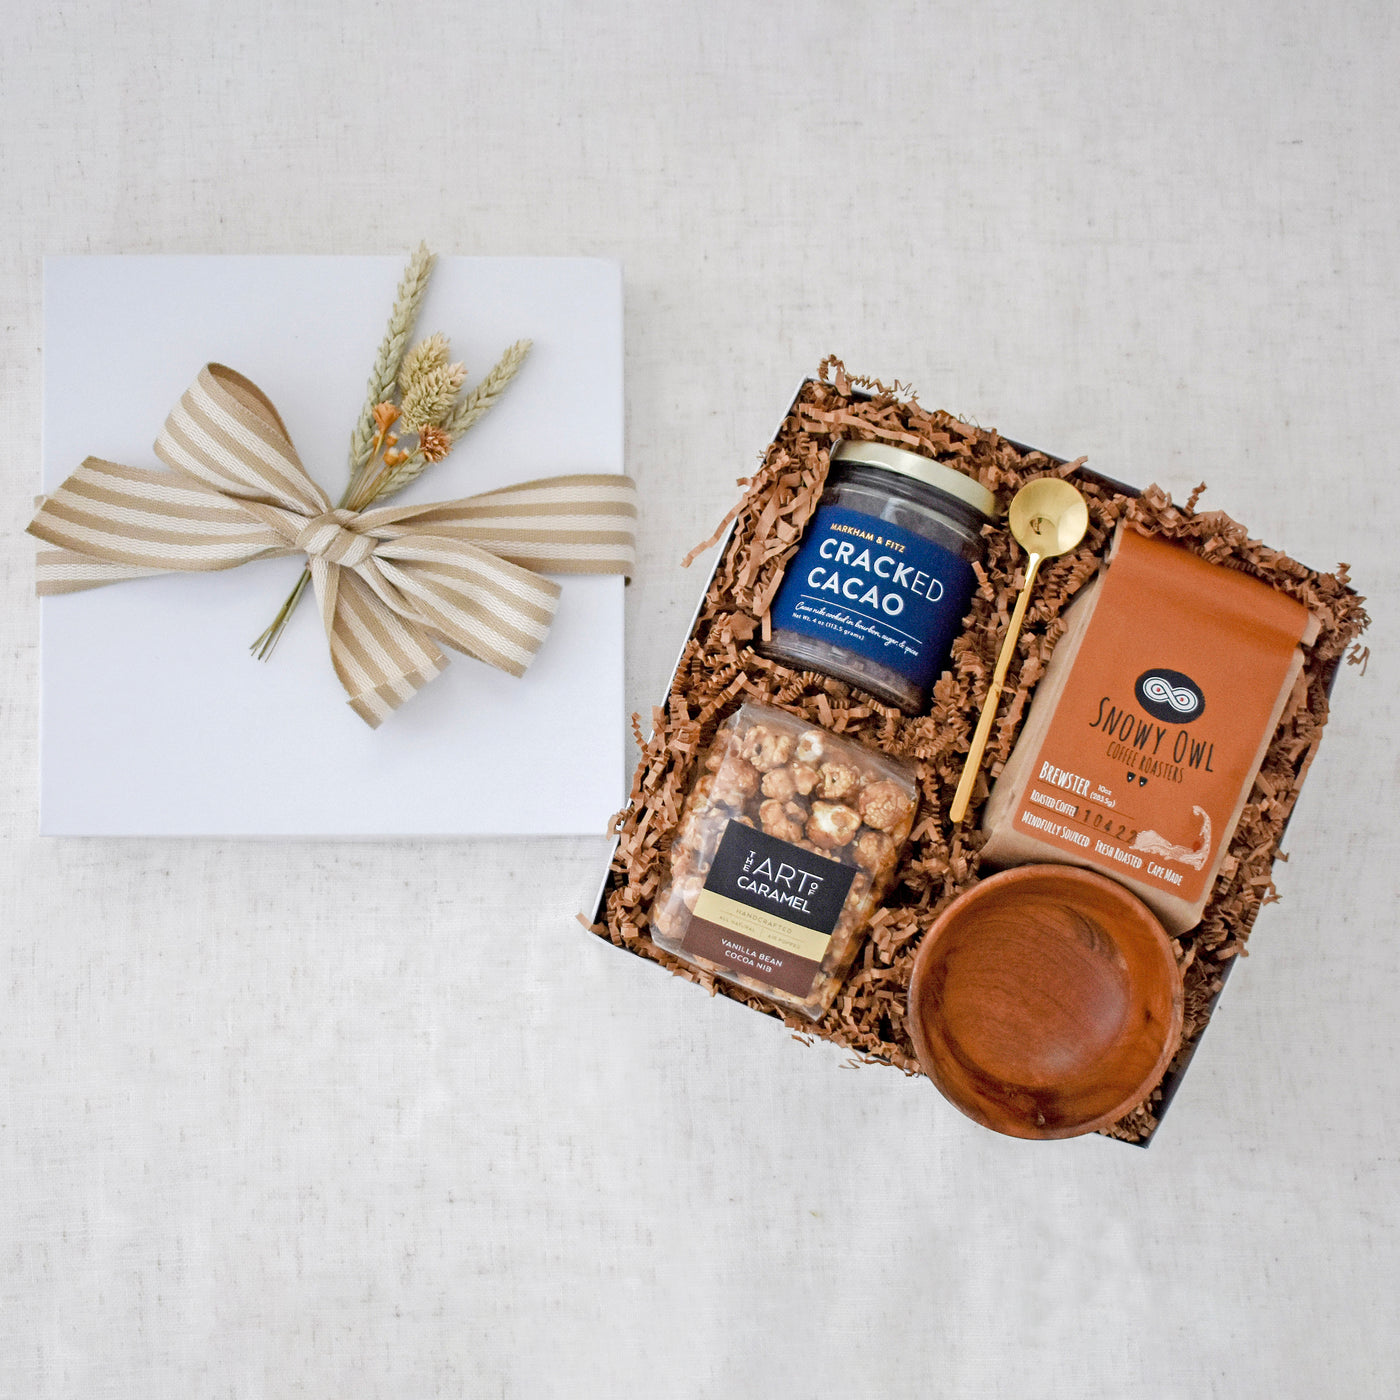 Encourage the break from reality to enjoy some sweet treats and a cup of joe. This gift basket includes: Cracked Cacao, Brewster Coffee, Vanilla Bean Cocoa Nib Popcorn, Wooden Pinch Bowl, Gold Stirring Spoon